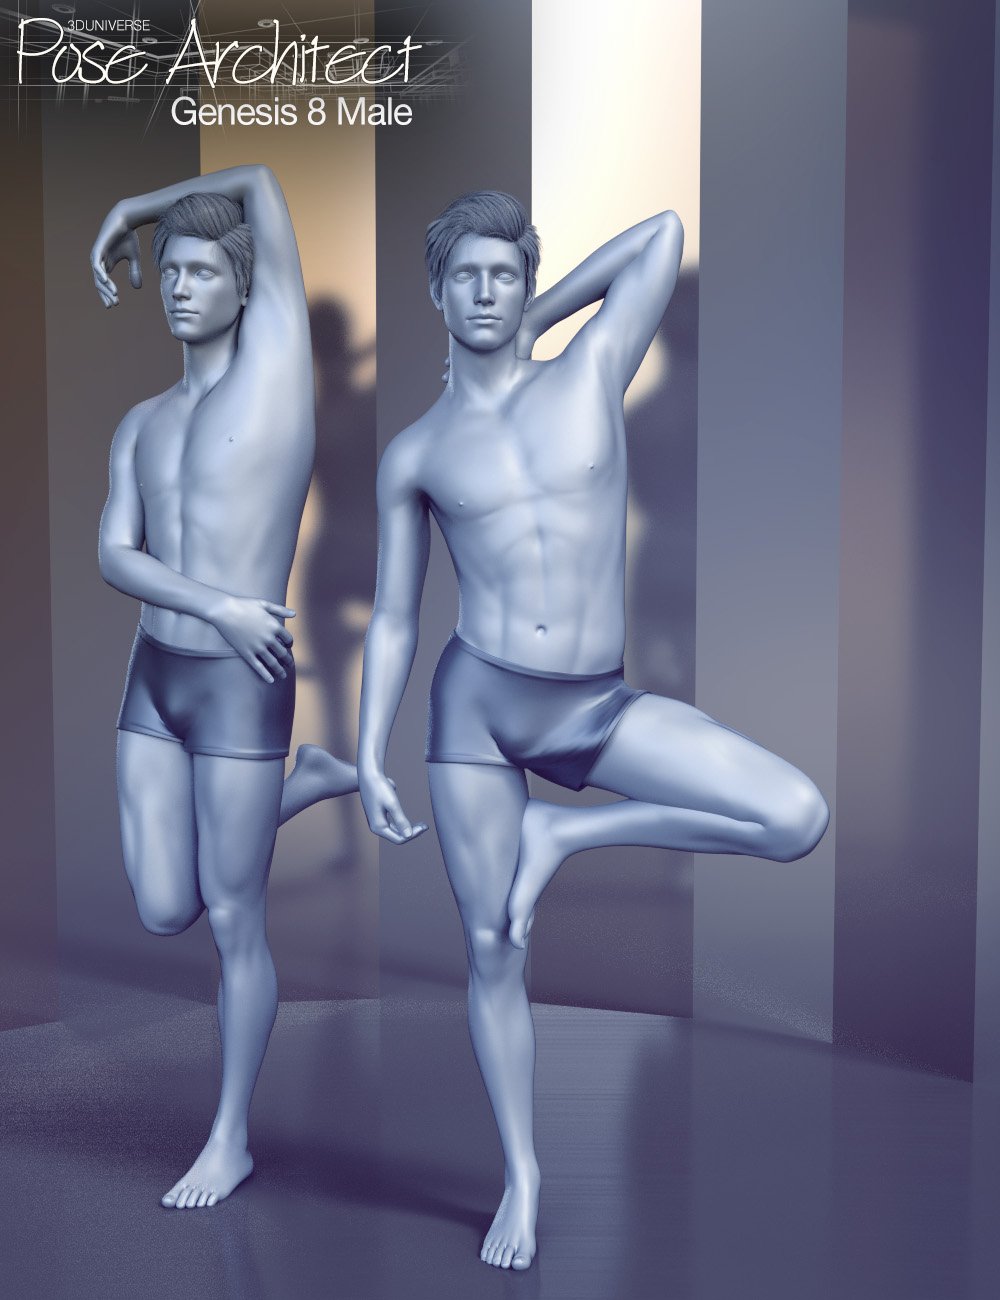 Pose Architect for Genesis 8 Male(s) by: 3D Universe, 3D Models by Daz 3D